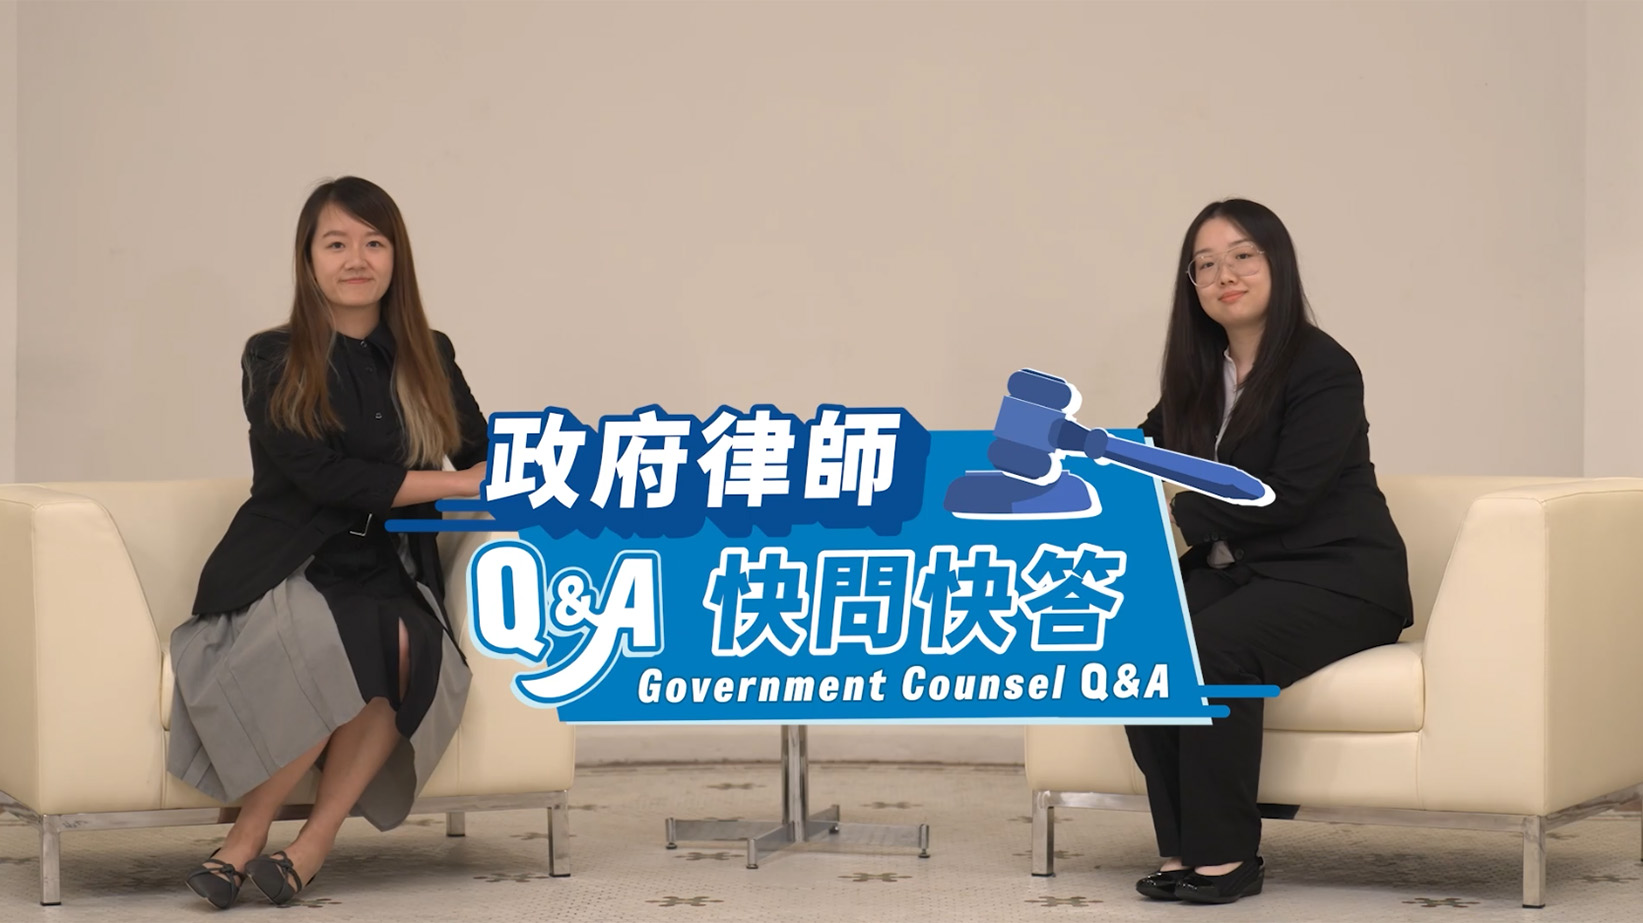 Government Counsel Q&A (Constitutional and Policy Affairs Division, International Law Division)